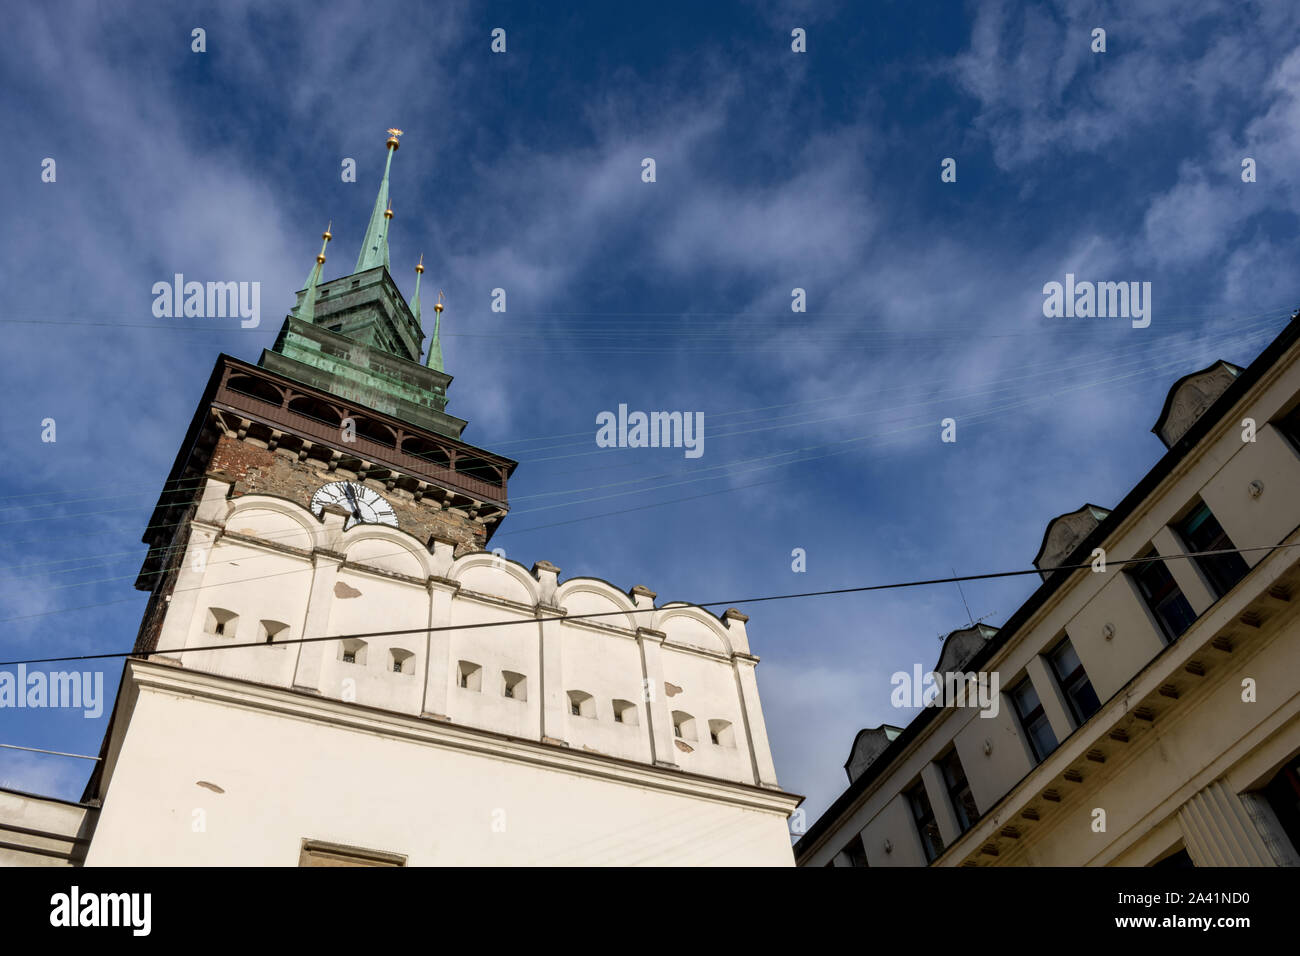 View of the Green Tower entering Pardubice, Czech Republic Stock Photo